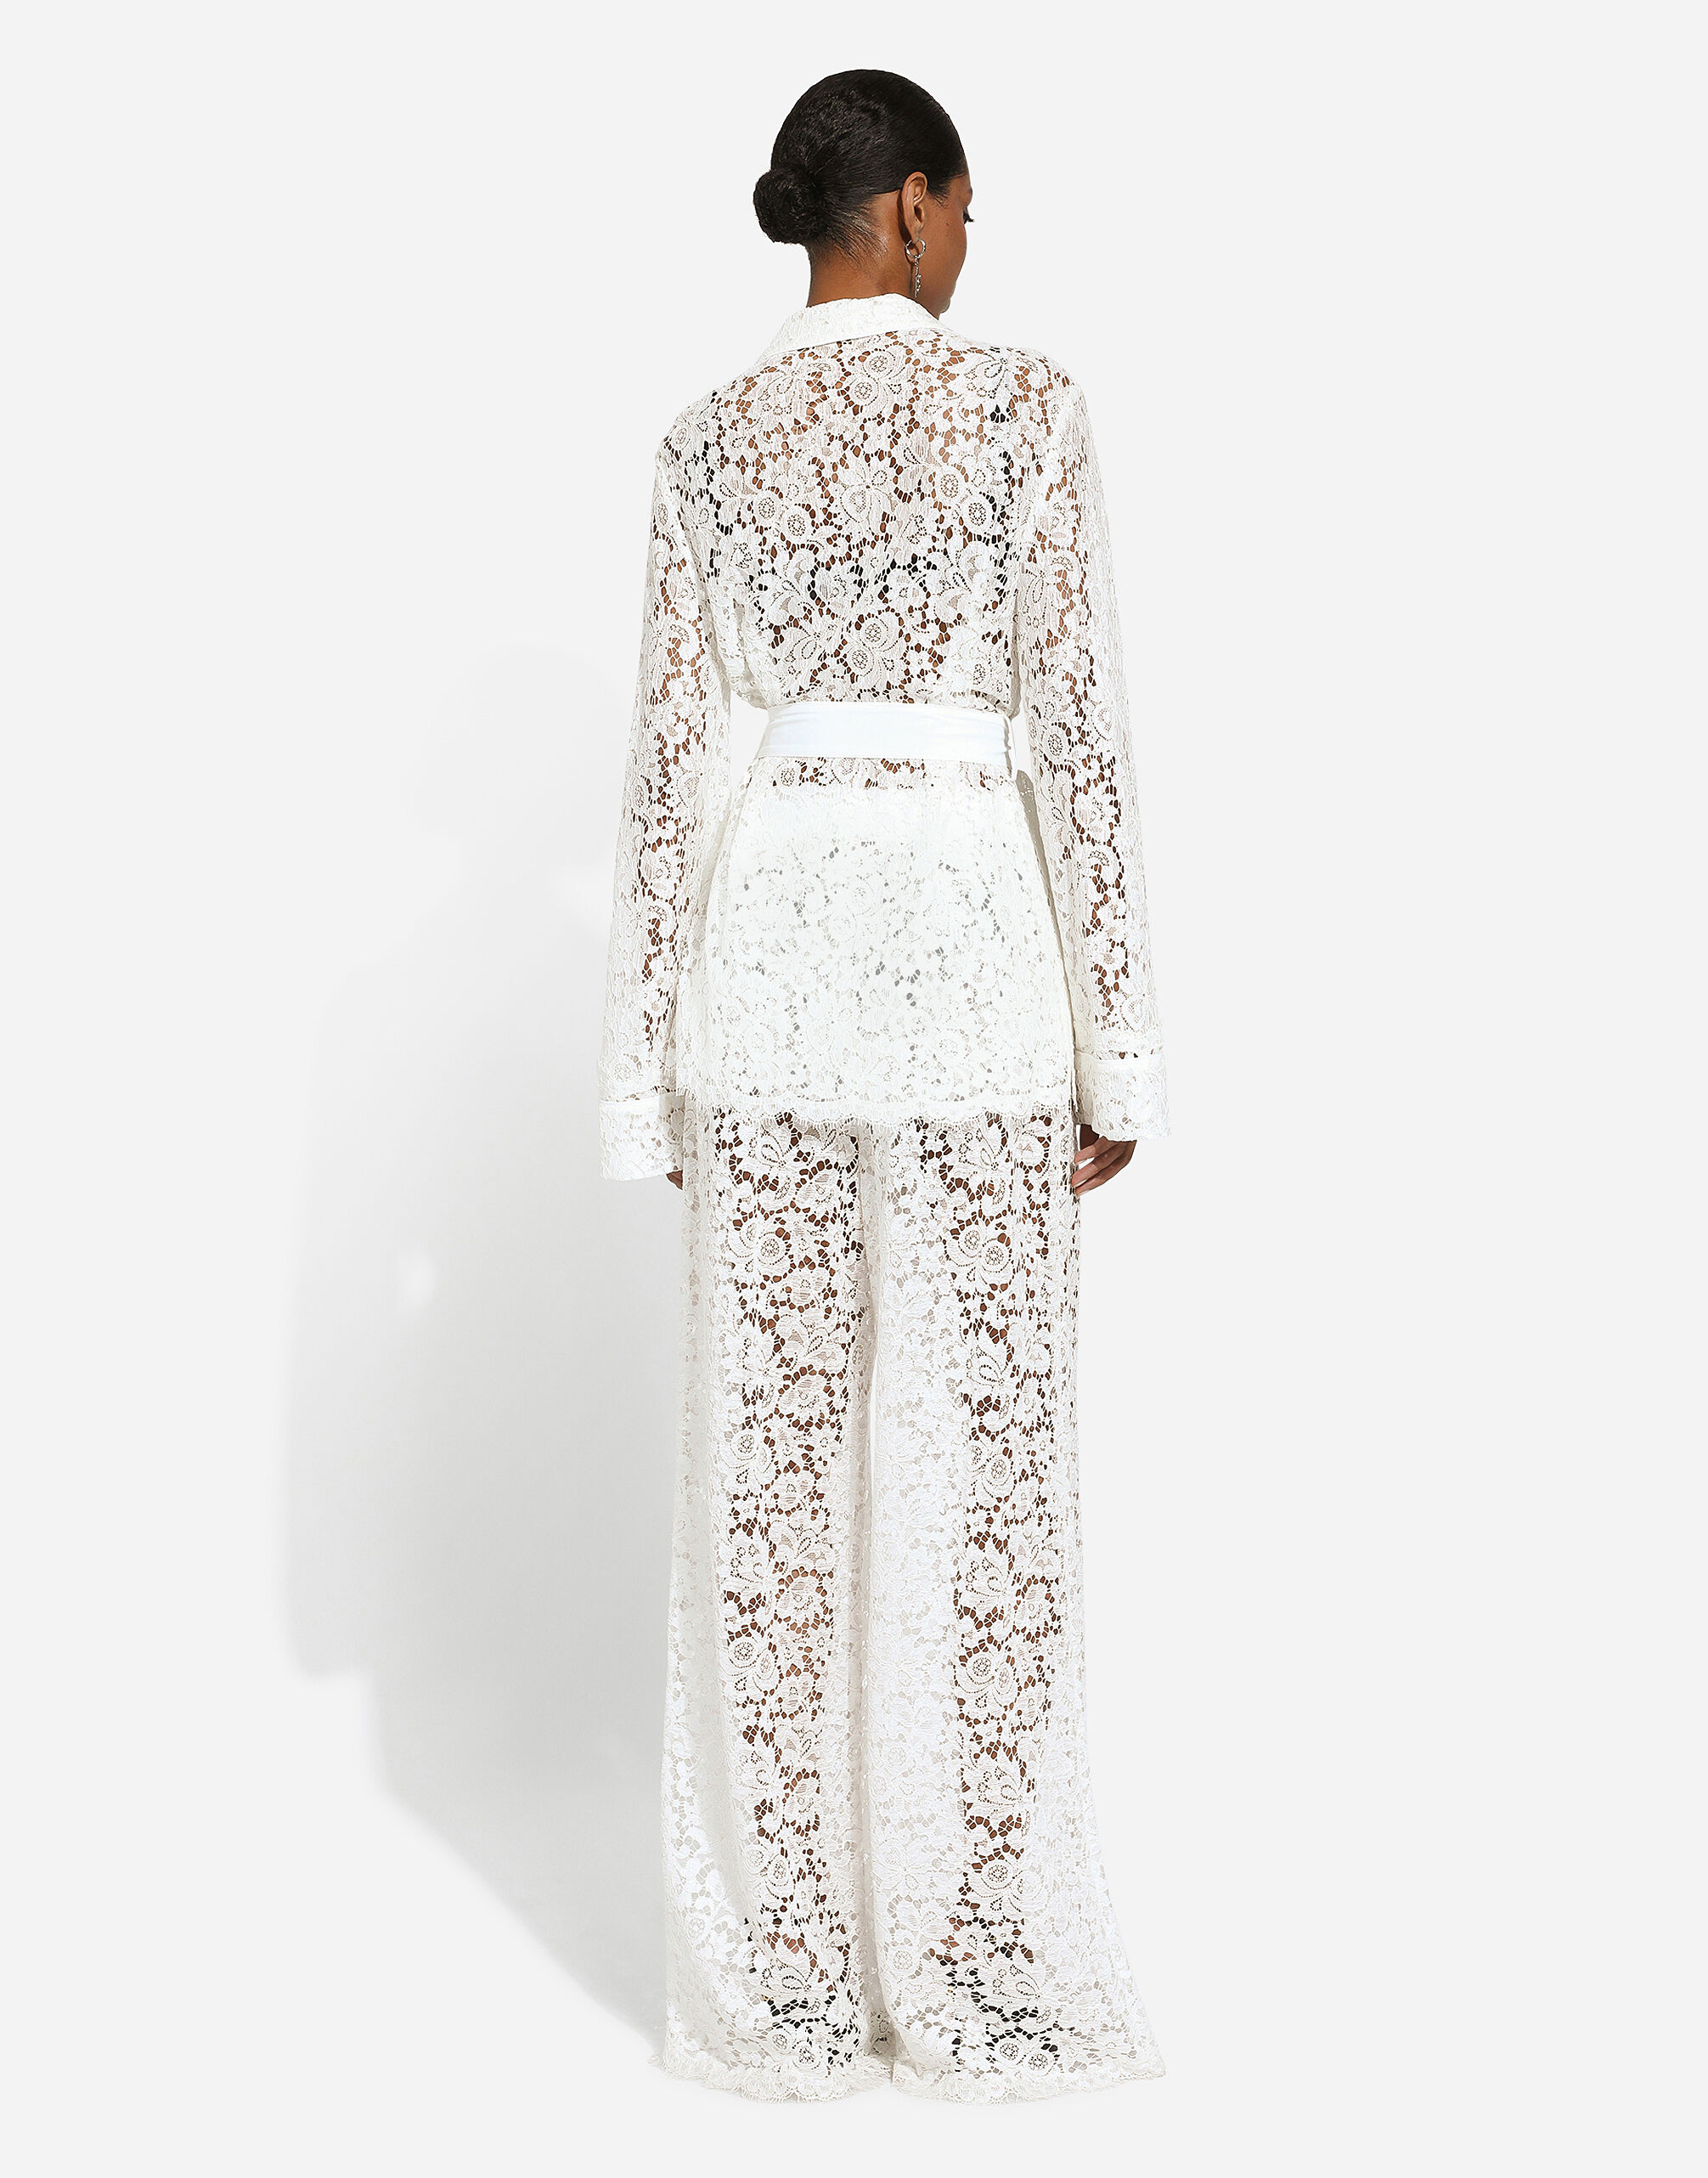 Flared floral cordonetto lace pants in White for | Dolce&Gabbana® US